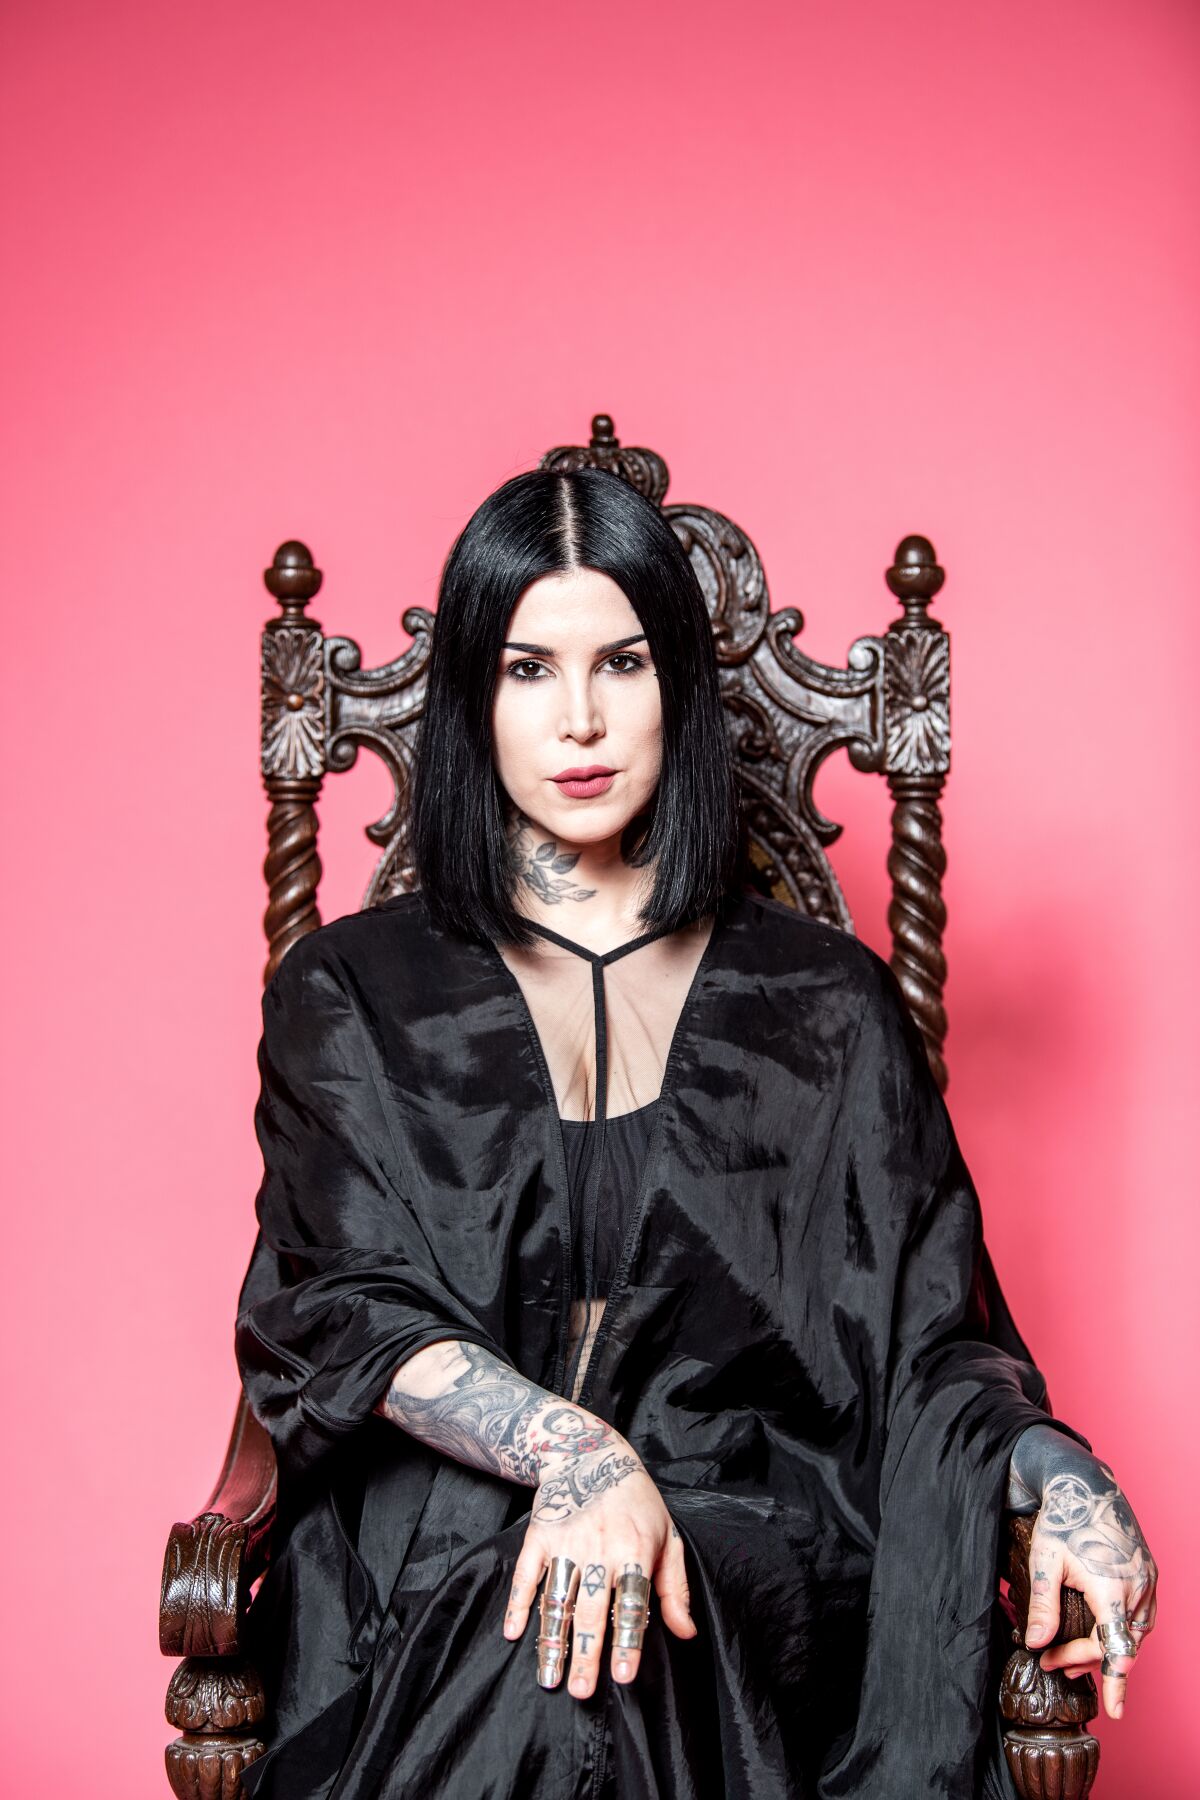 Kat Von D on shoes and 'the vaccine issue' - Angeles